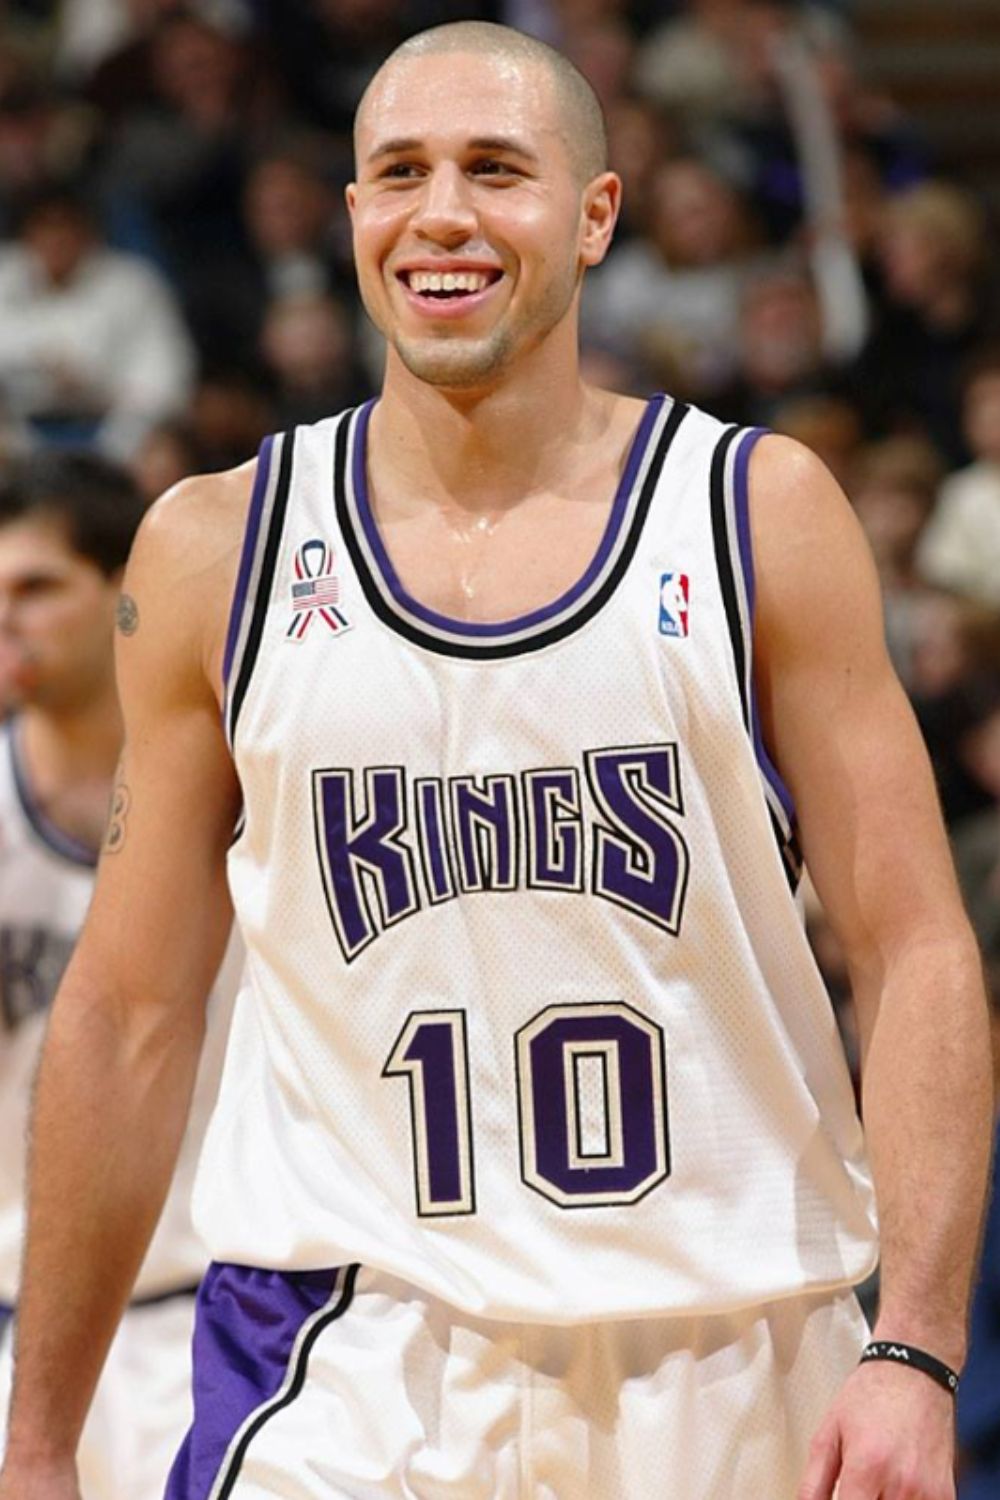 Former Professional Basketball Player Mike Bibby